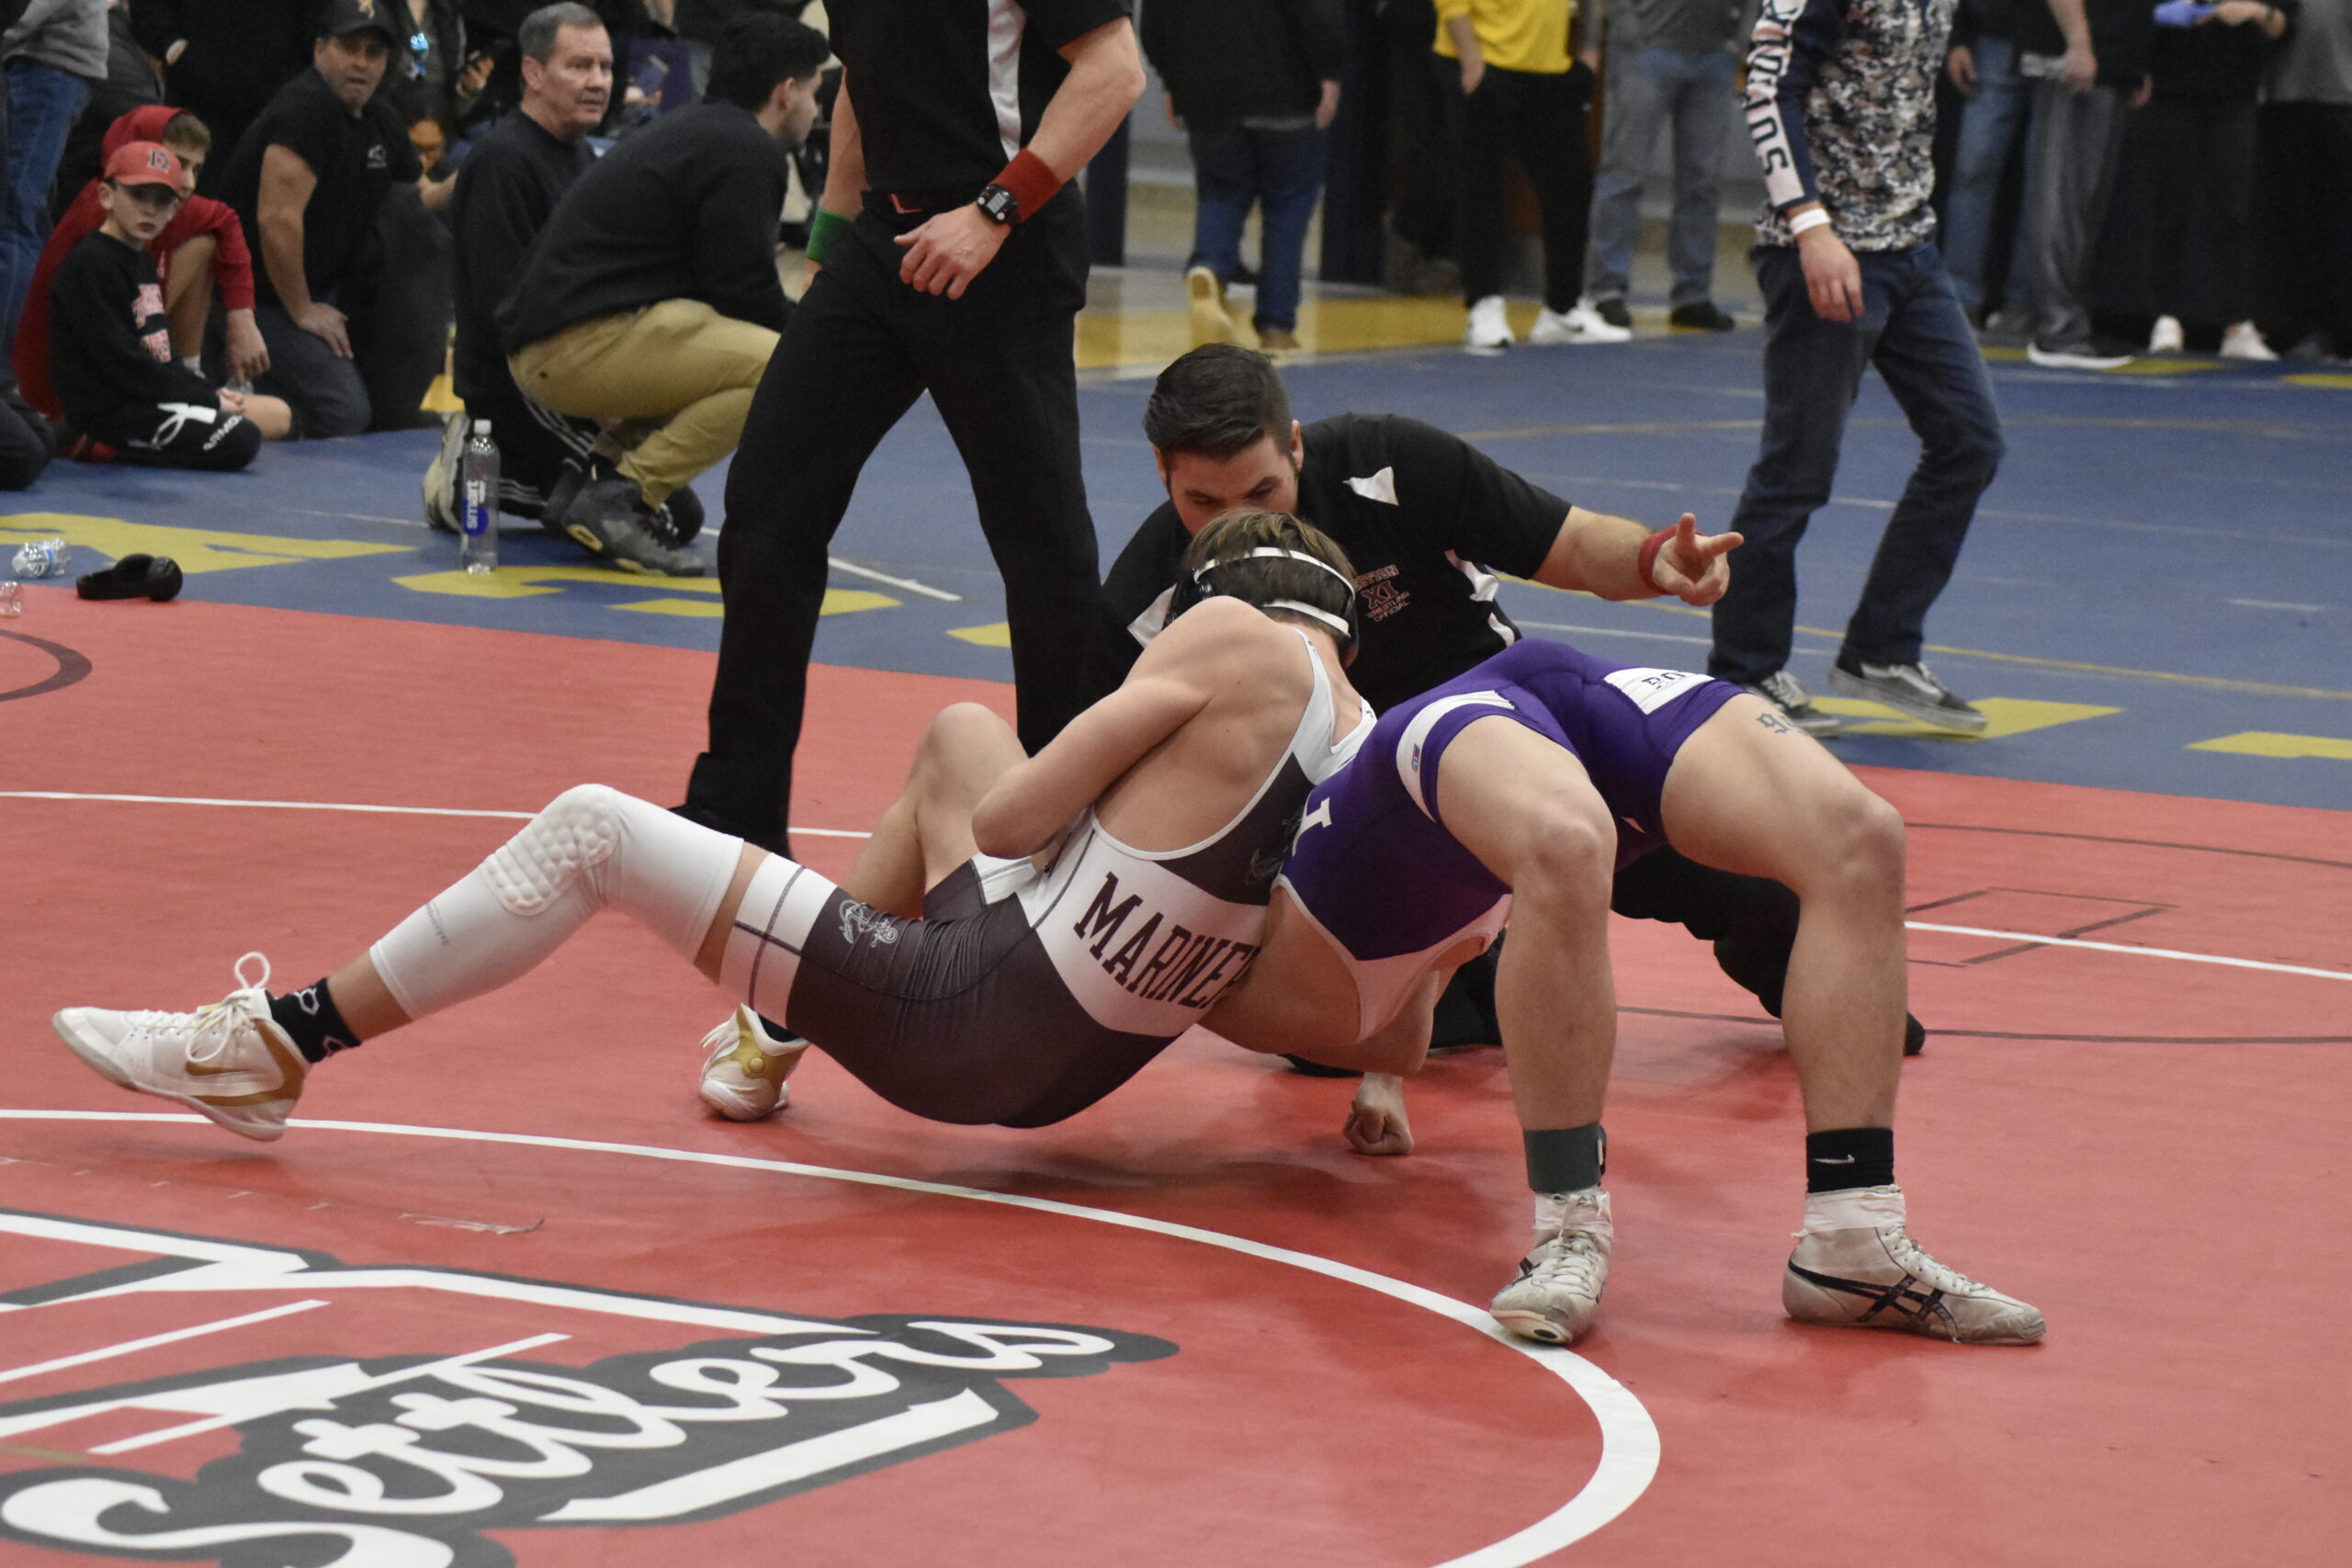 Southampton's Hudson Fox nearly pinned Port Jeff's Liam Rogers in the county semifinal.   DREW BUDD